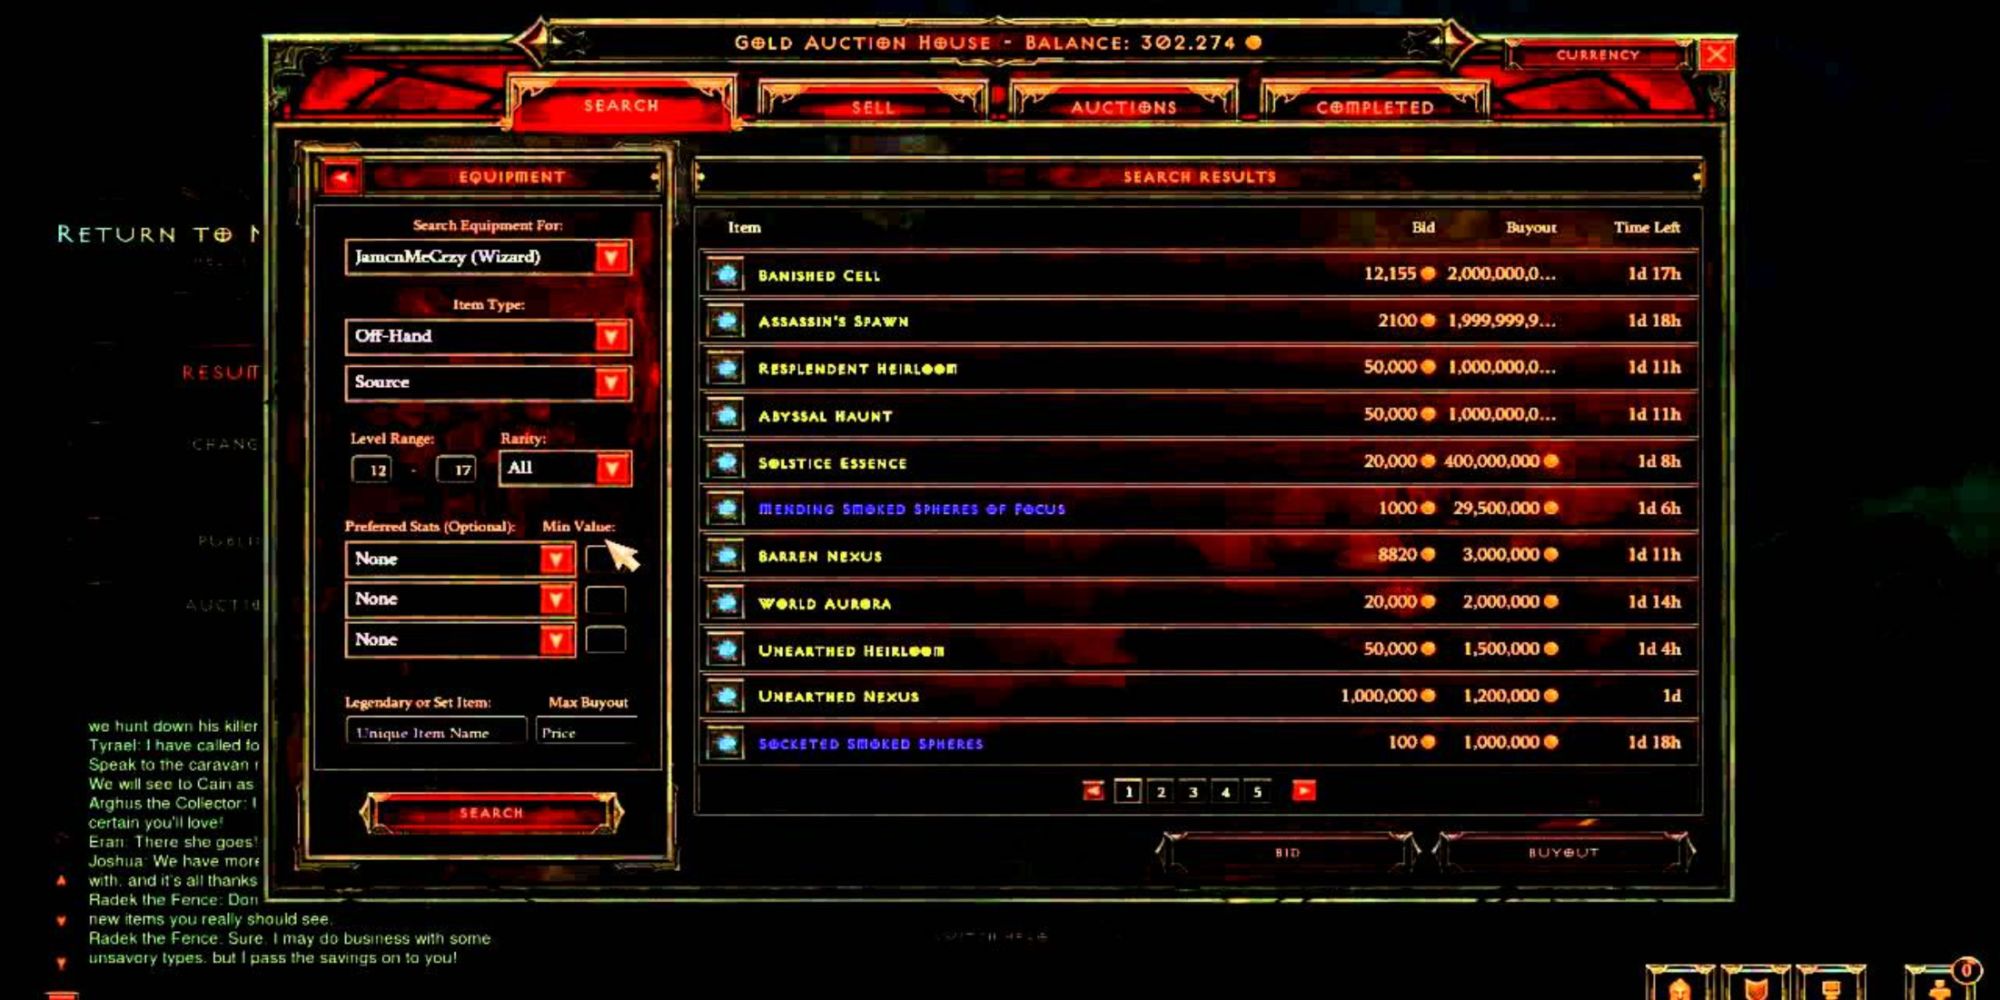 Diablo 3 The Auction House invalidated the game's loot-gathering systems